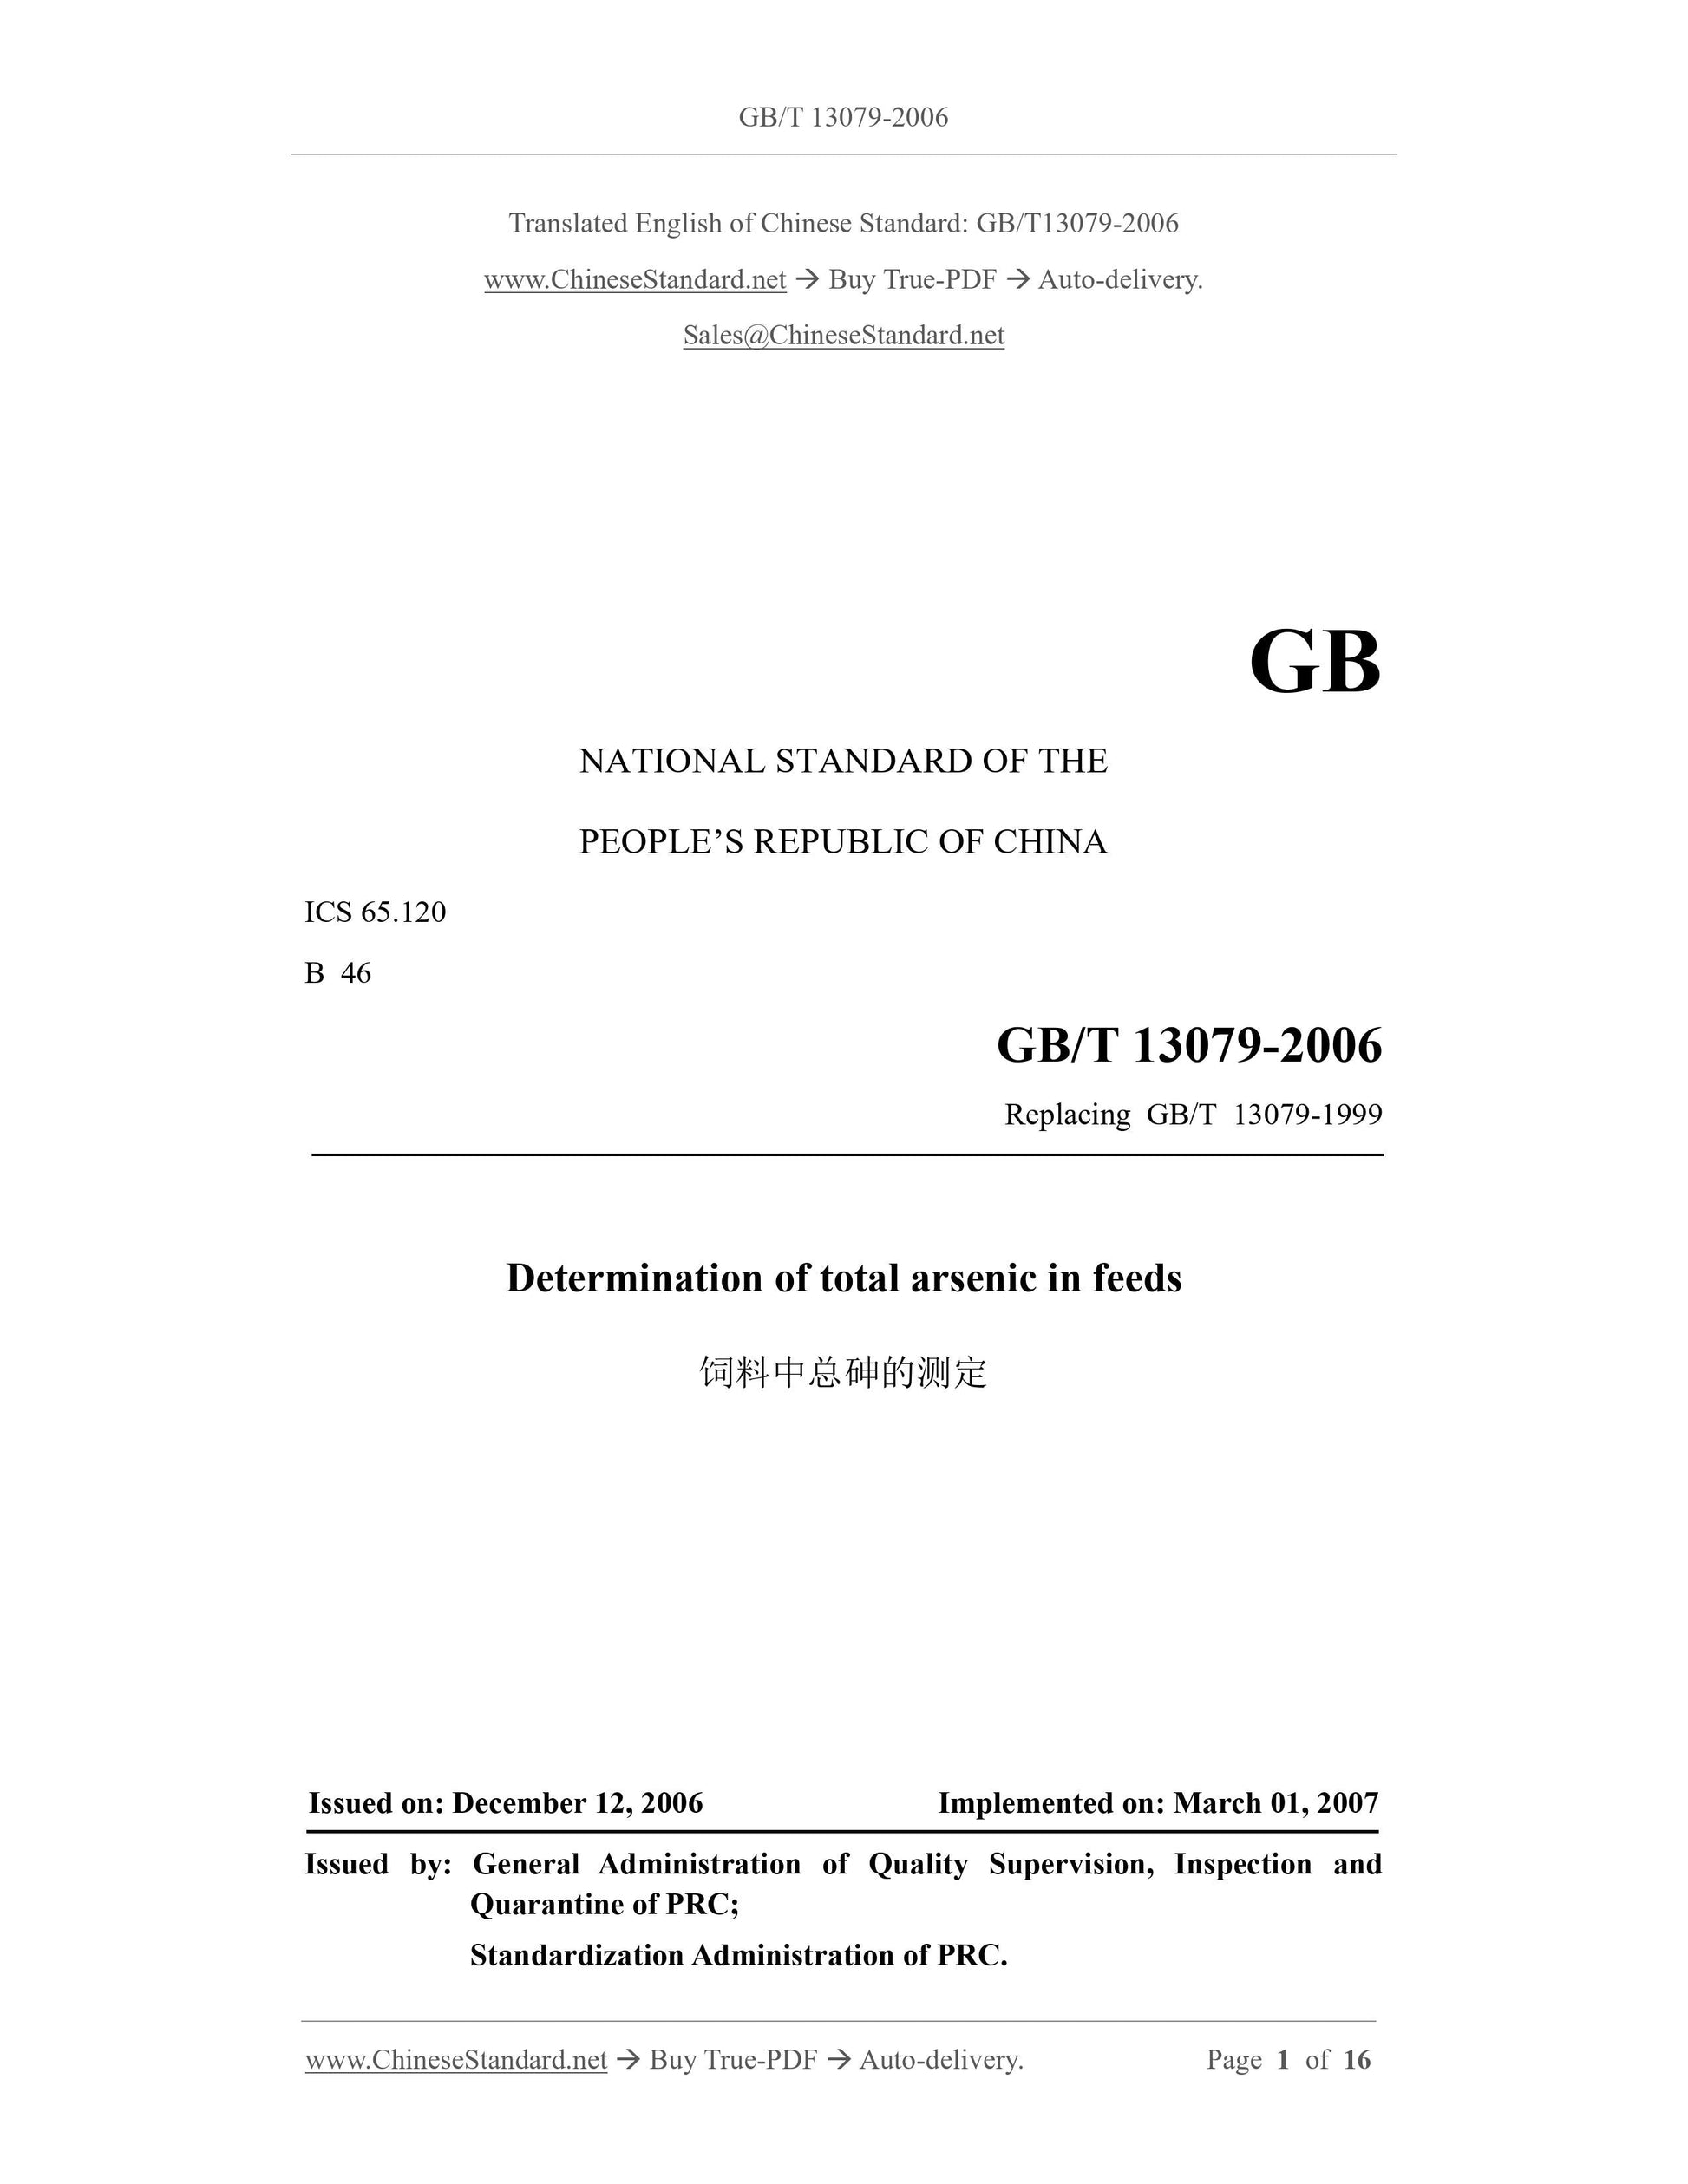 GB/T 13079-2006 Page 1